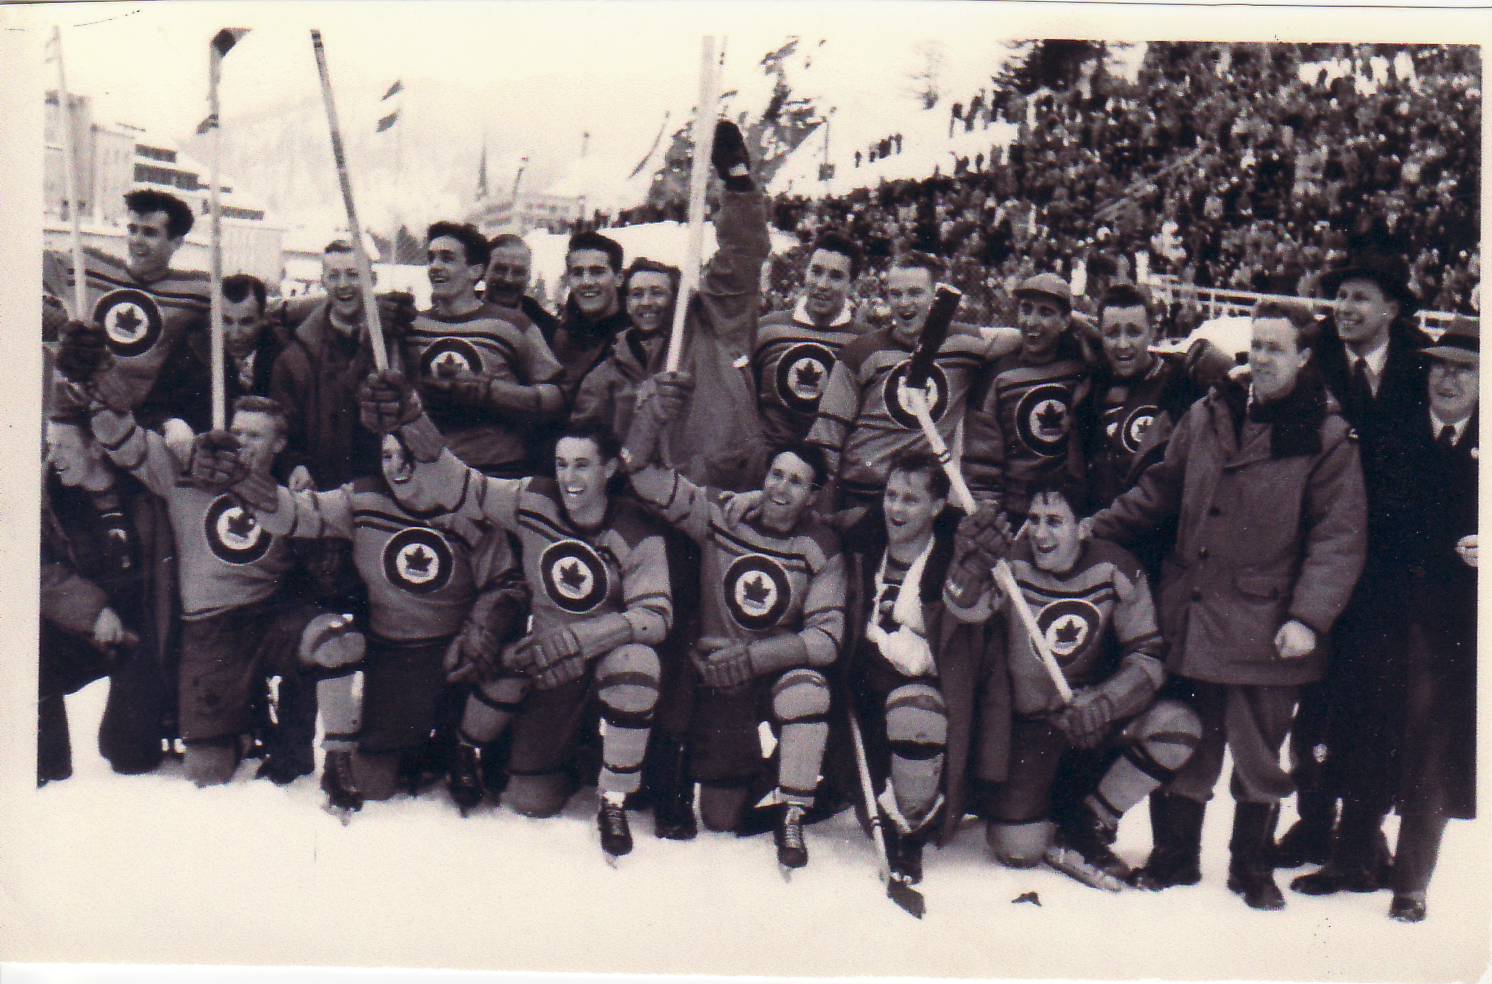 The RCAF Flyers celebrate their Gold Medal win over Switzerland on the outdoor rink at St. Moritz in 1948.